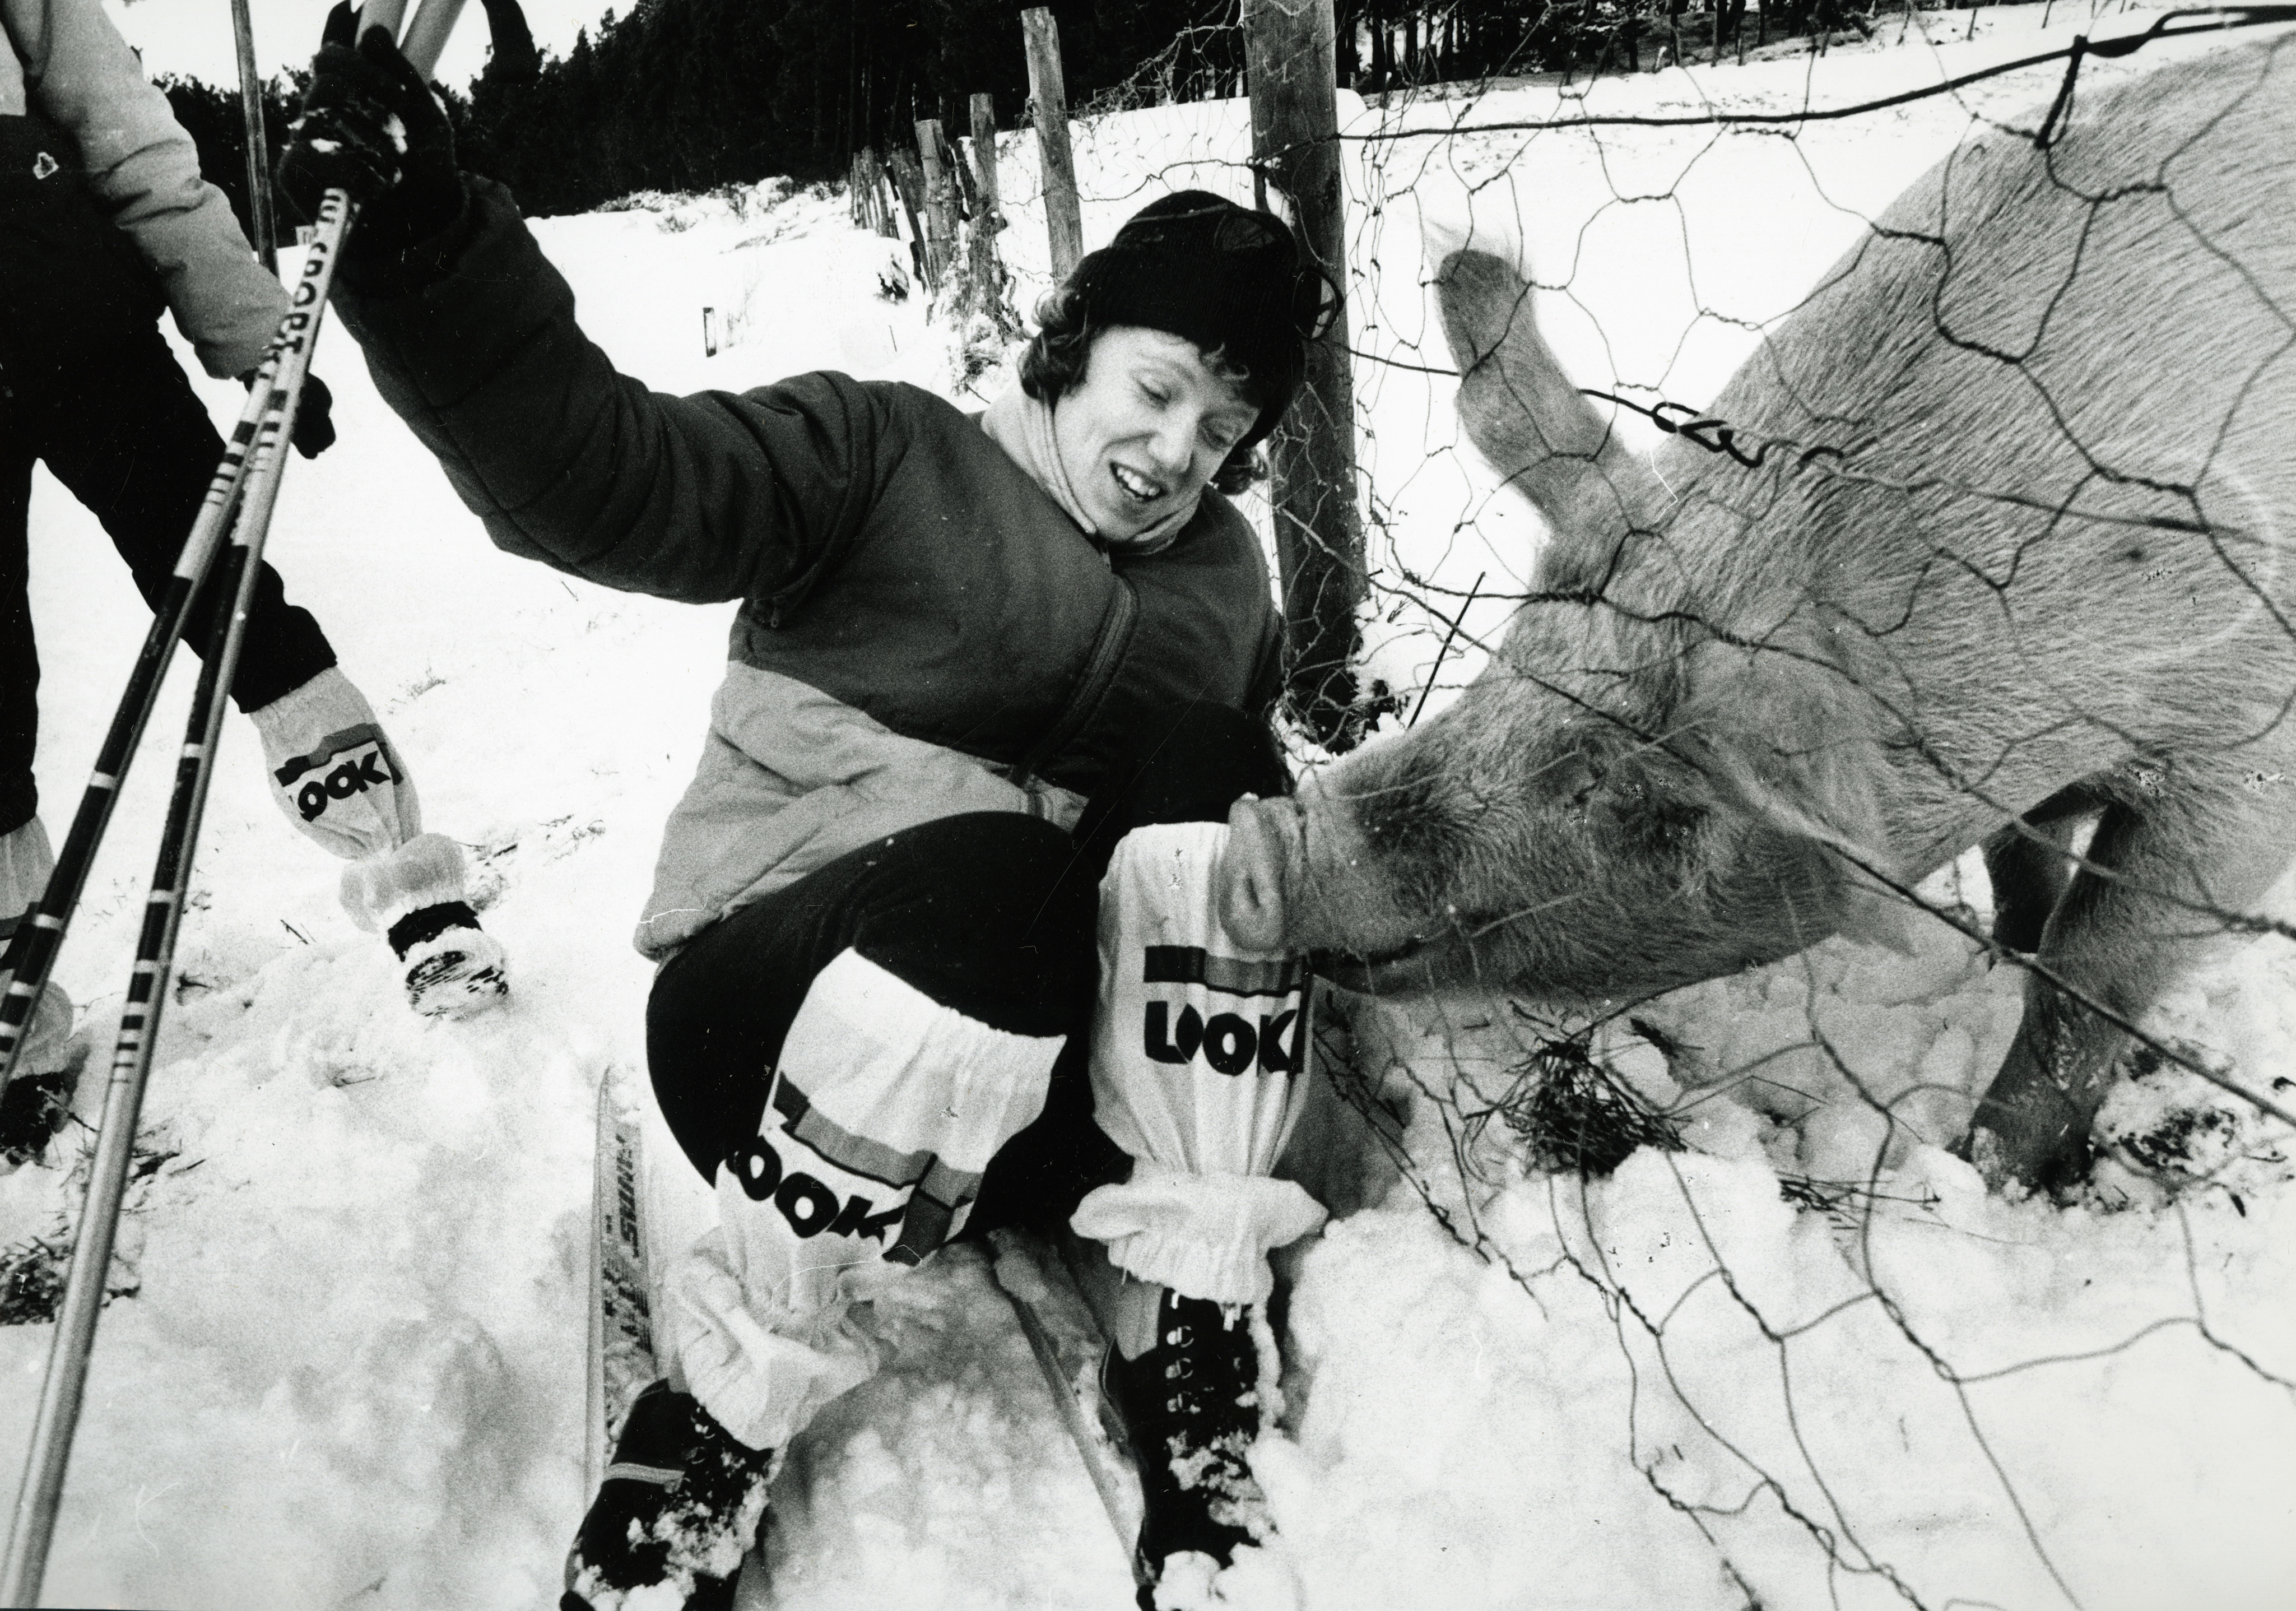 Jill Davidson found the snow was not her only adversary when she met up with Porker the pig, while skiing near the Allargue Hotel, Corgaff.